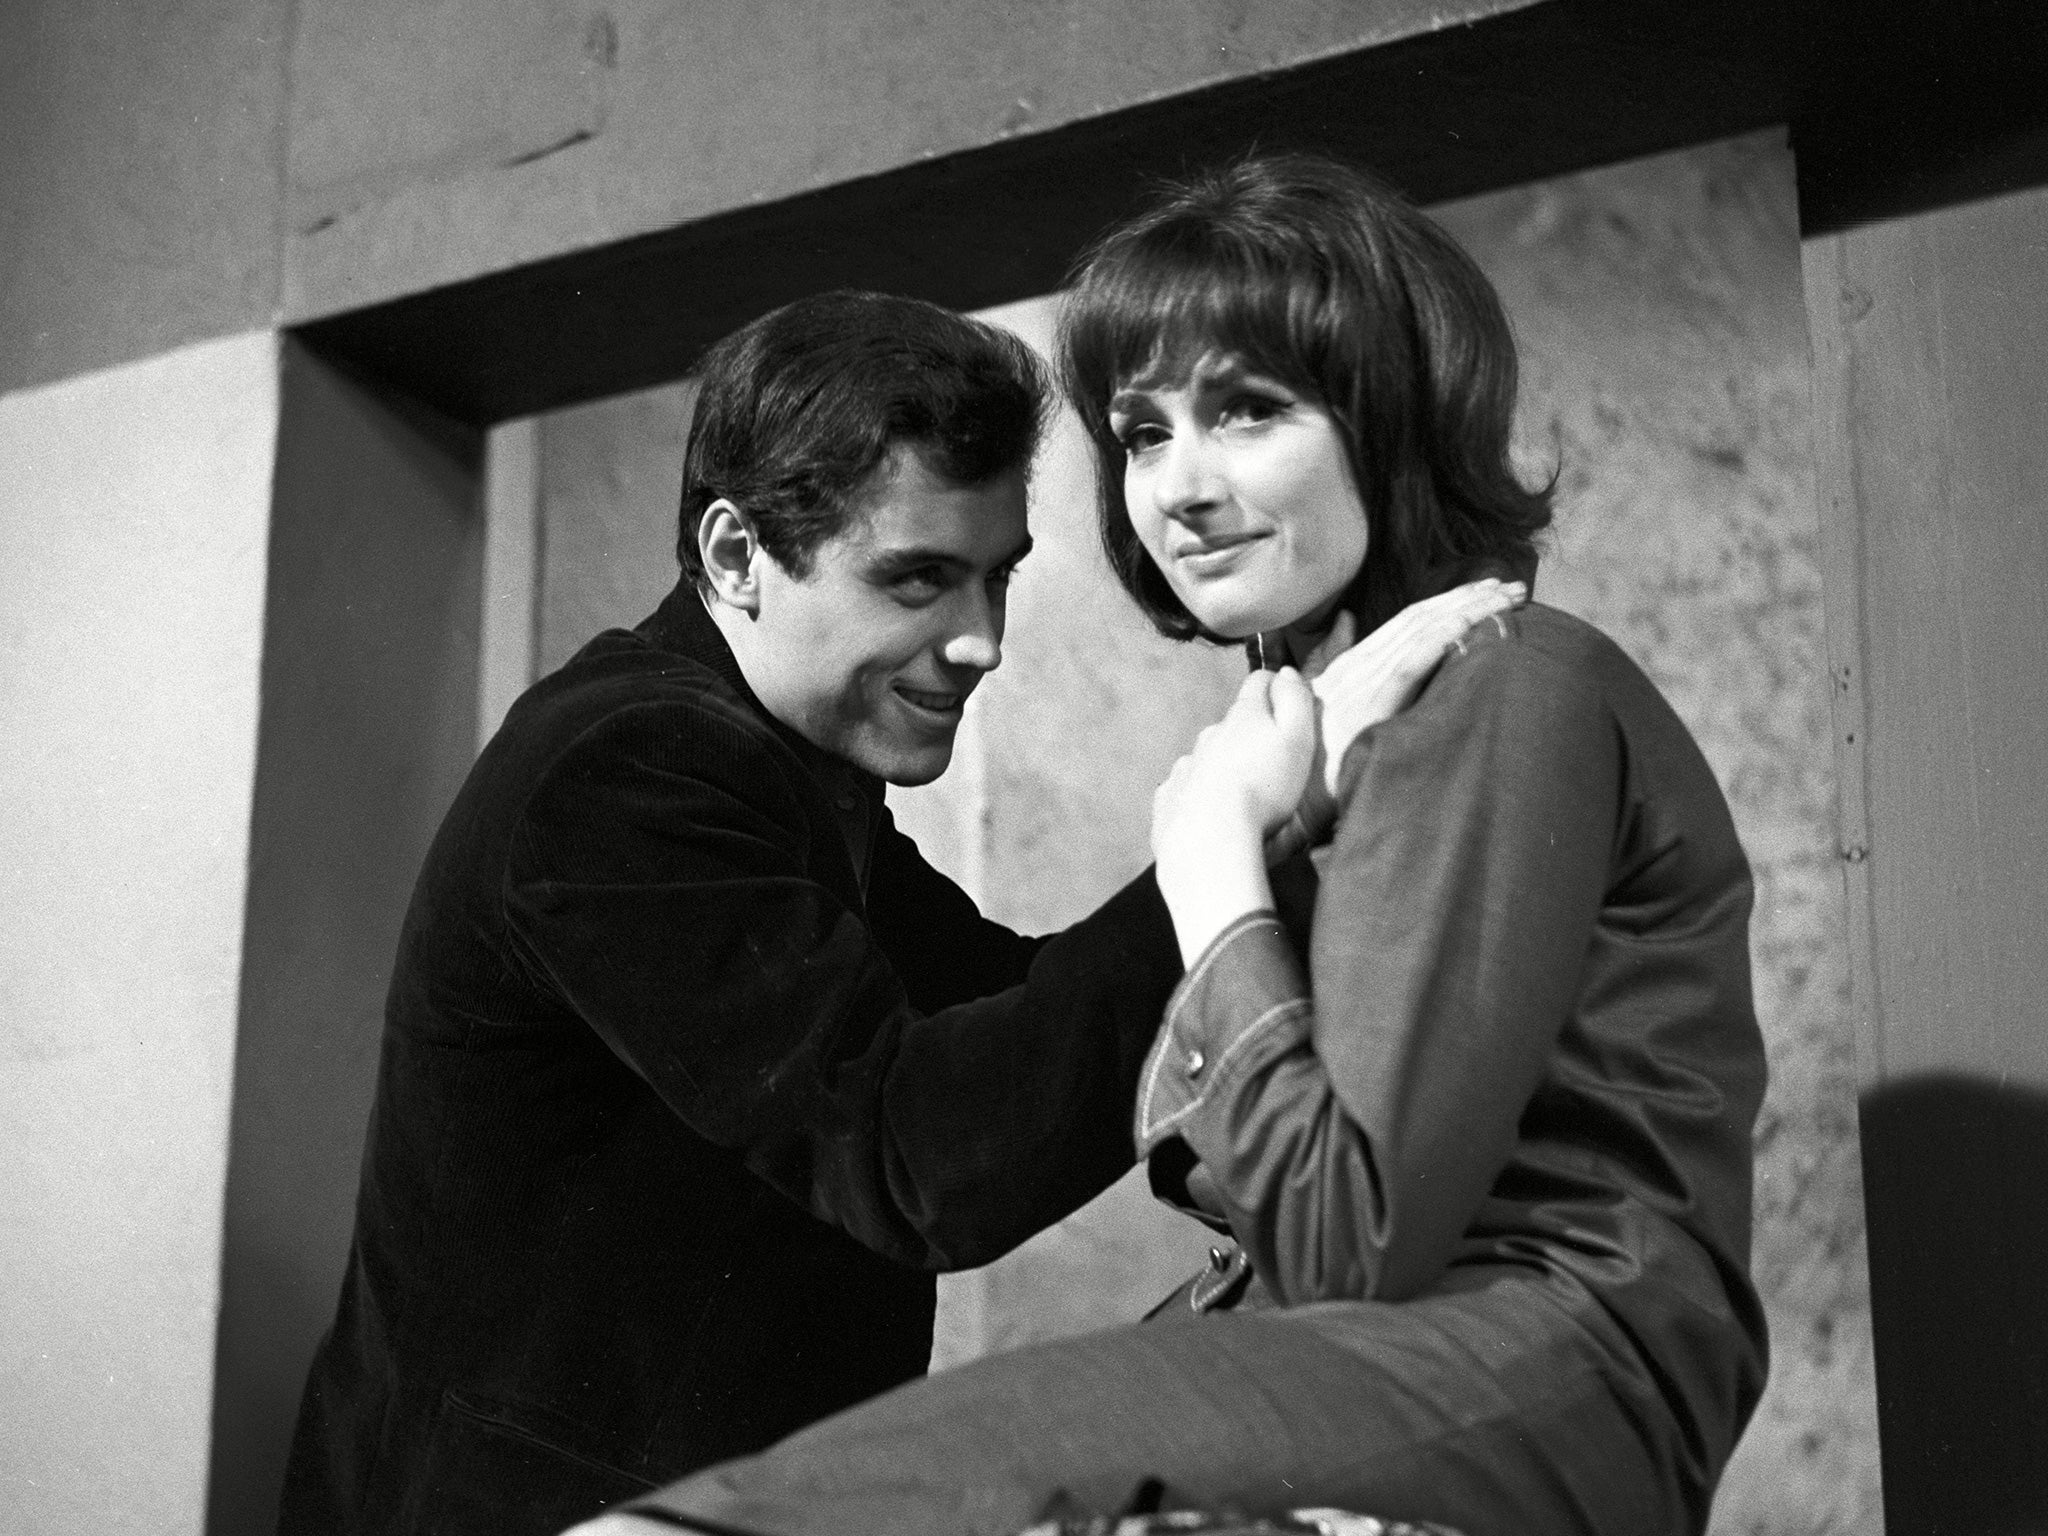 MacLennan with Ian McShane in 1963 in an ITV Play of the Week, ‘The Truth About Alan’